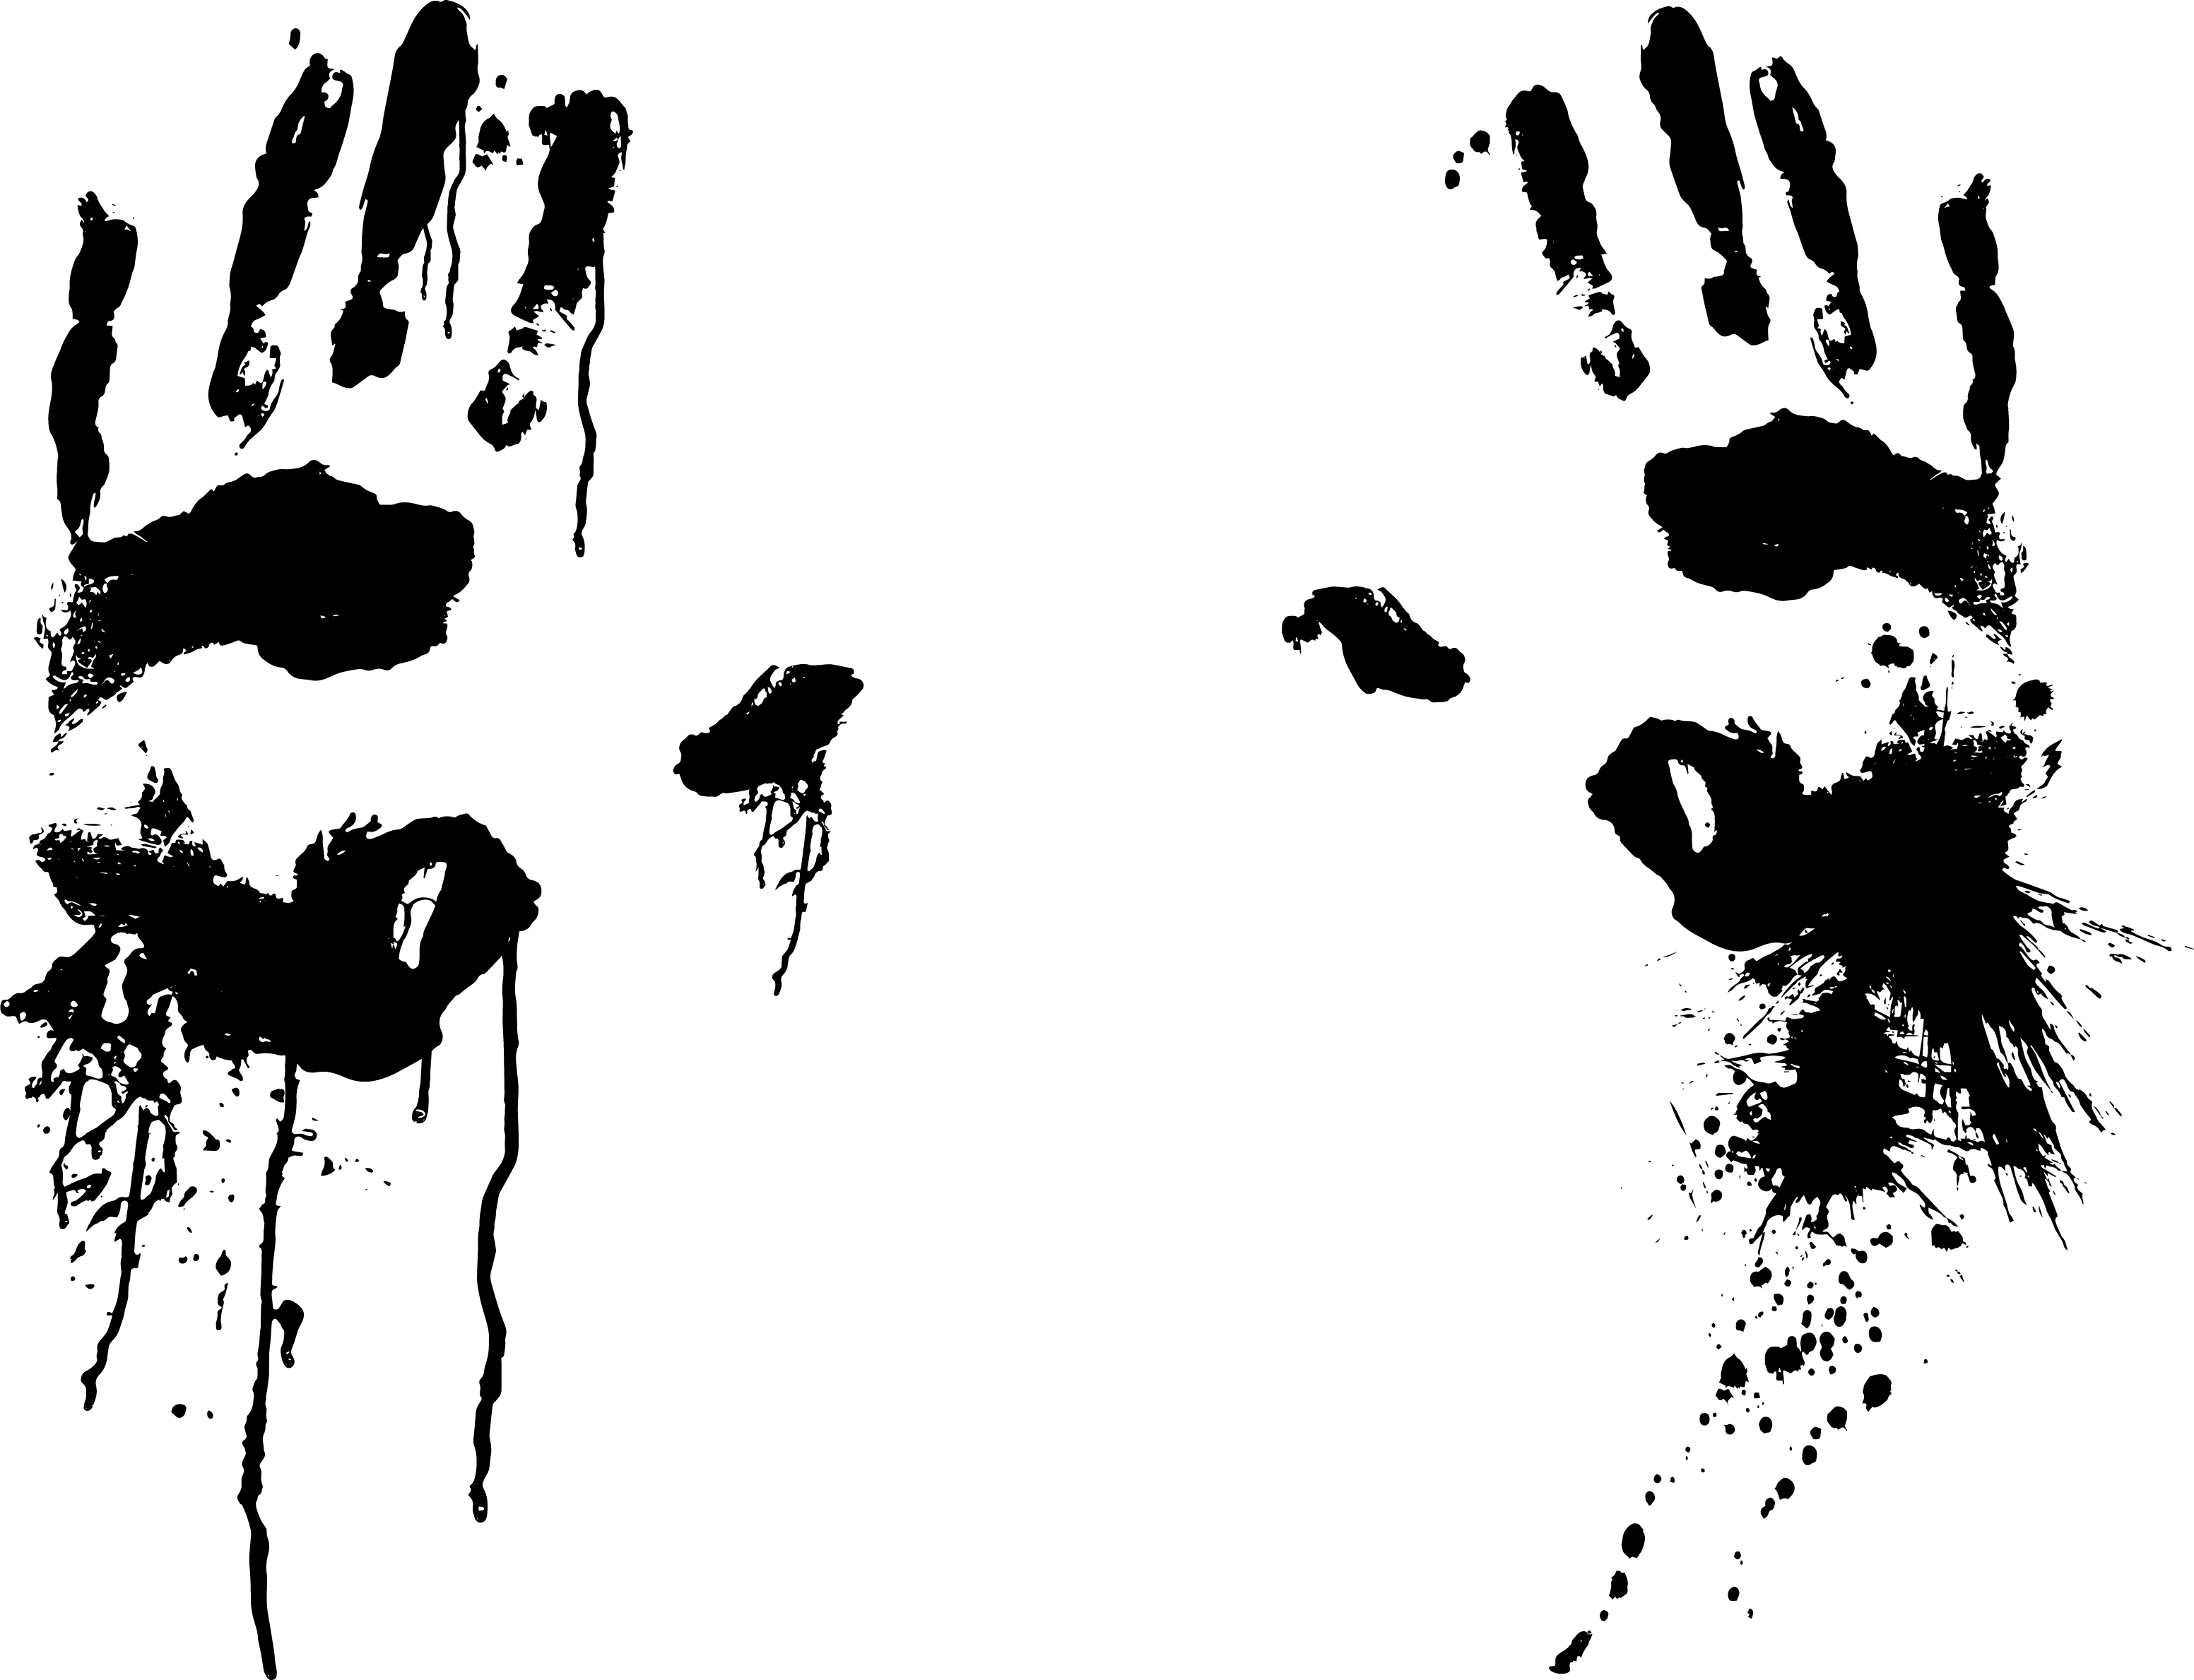 Download Bloody Hand Free Vector Art - (21 Free Downloads)